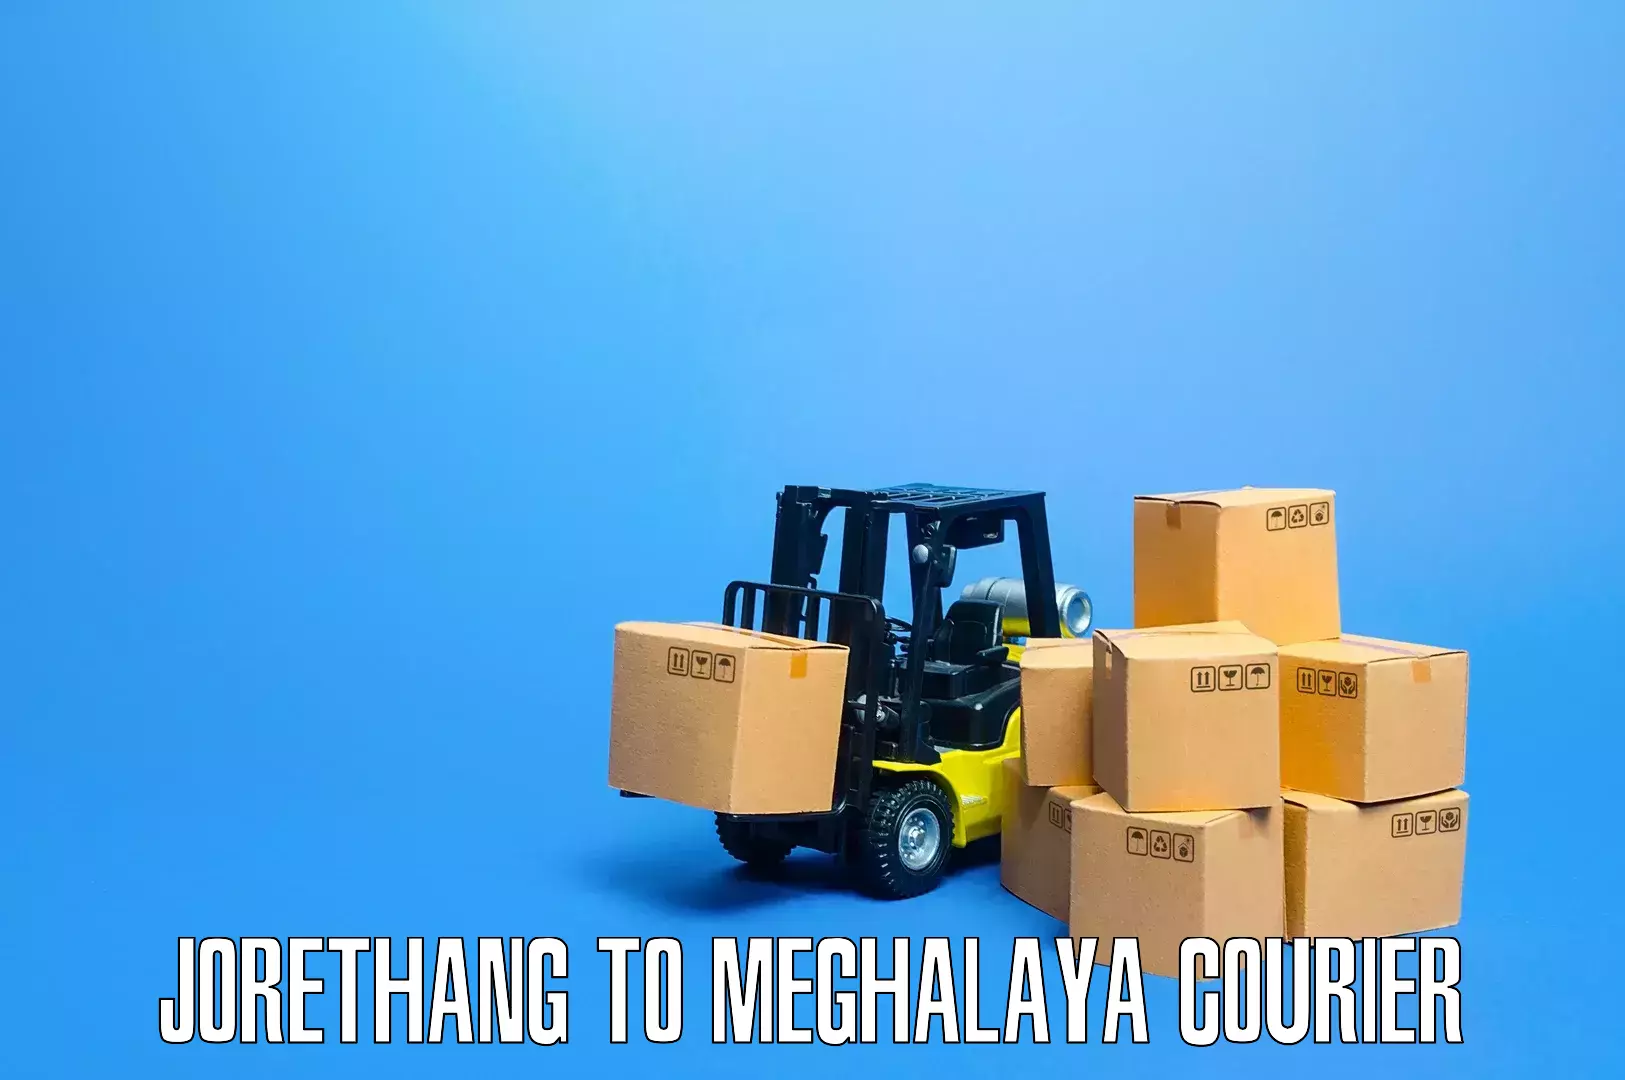 Furniture transport specialists Jorethang to Meghalaya